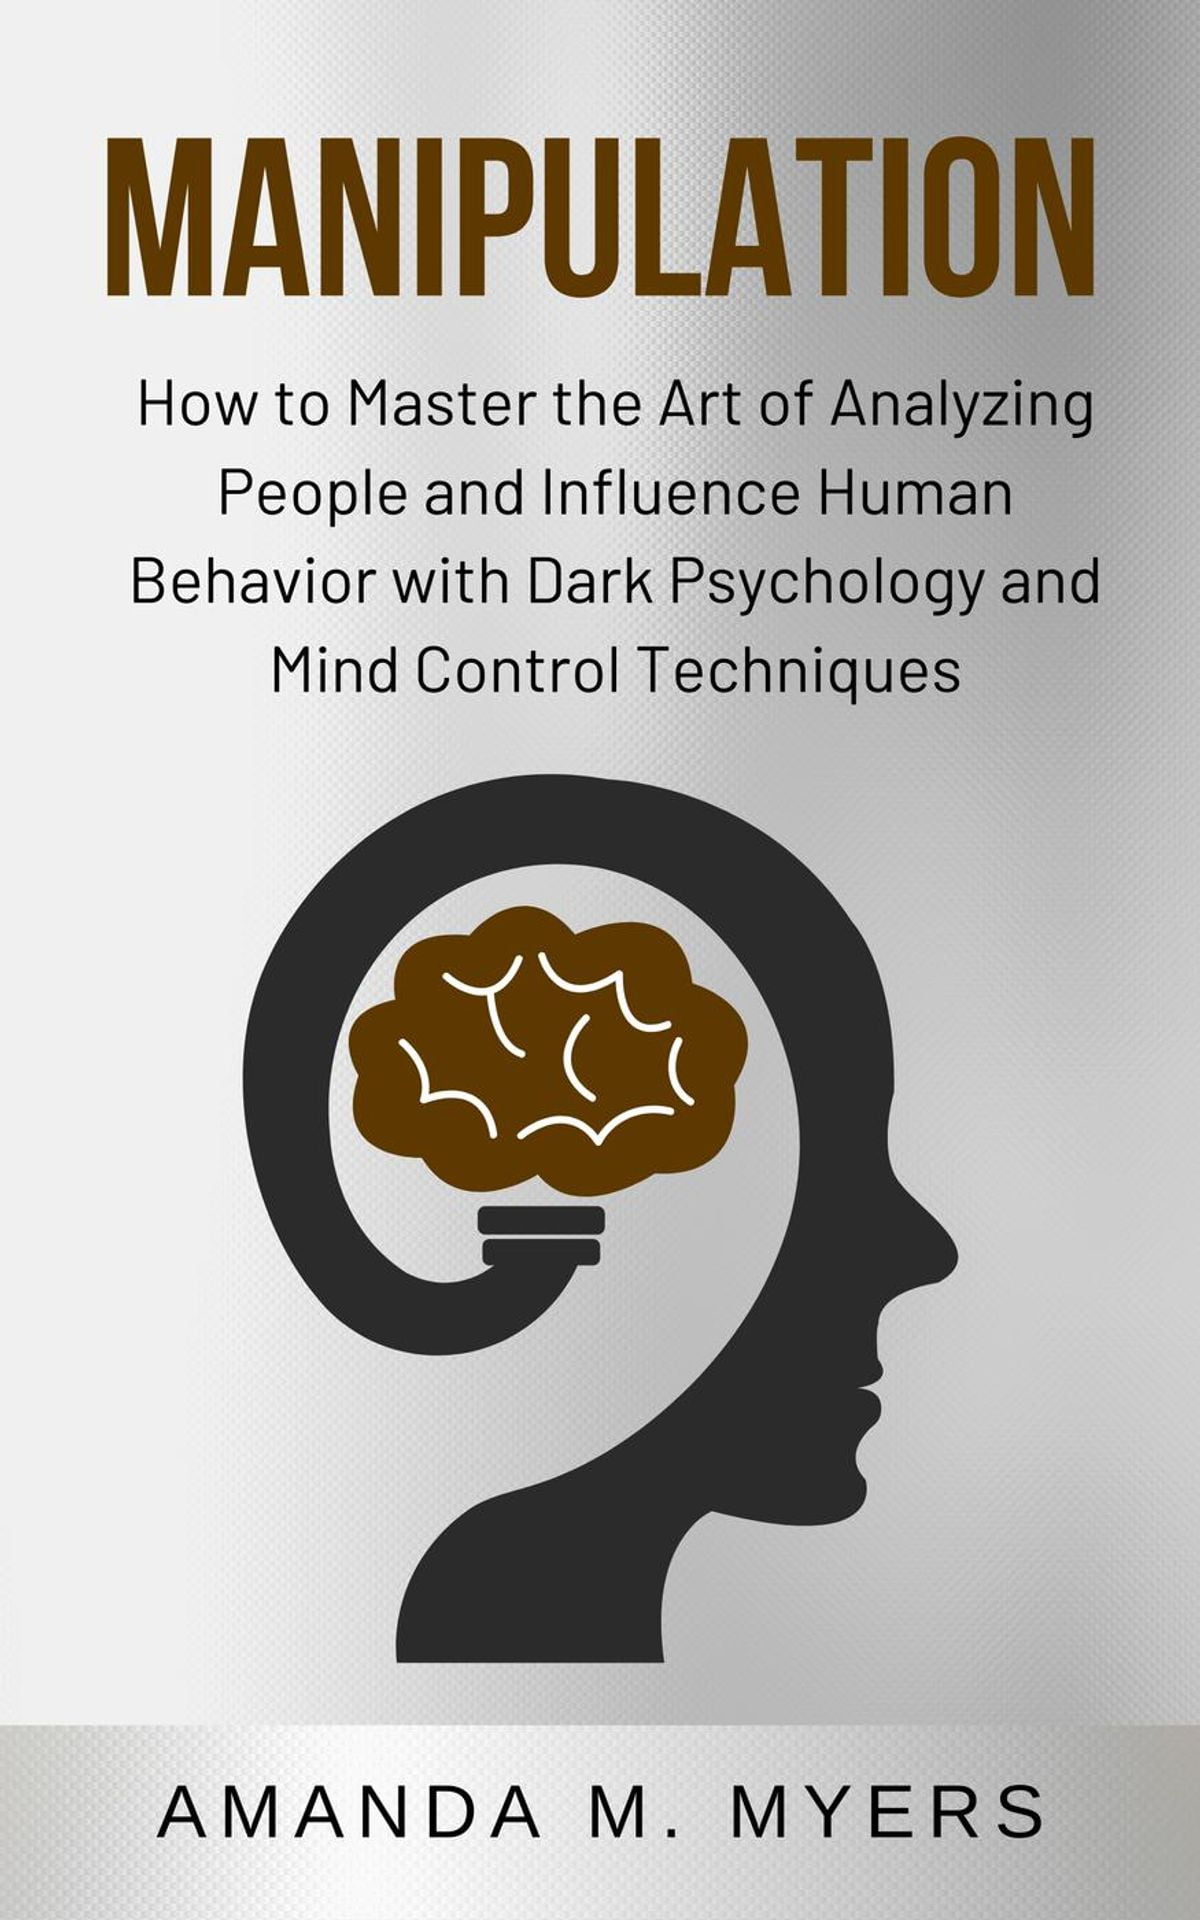 Manipulation: How to Master the Art of Analyzing People and Influence